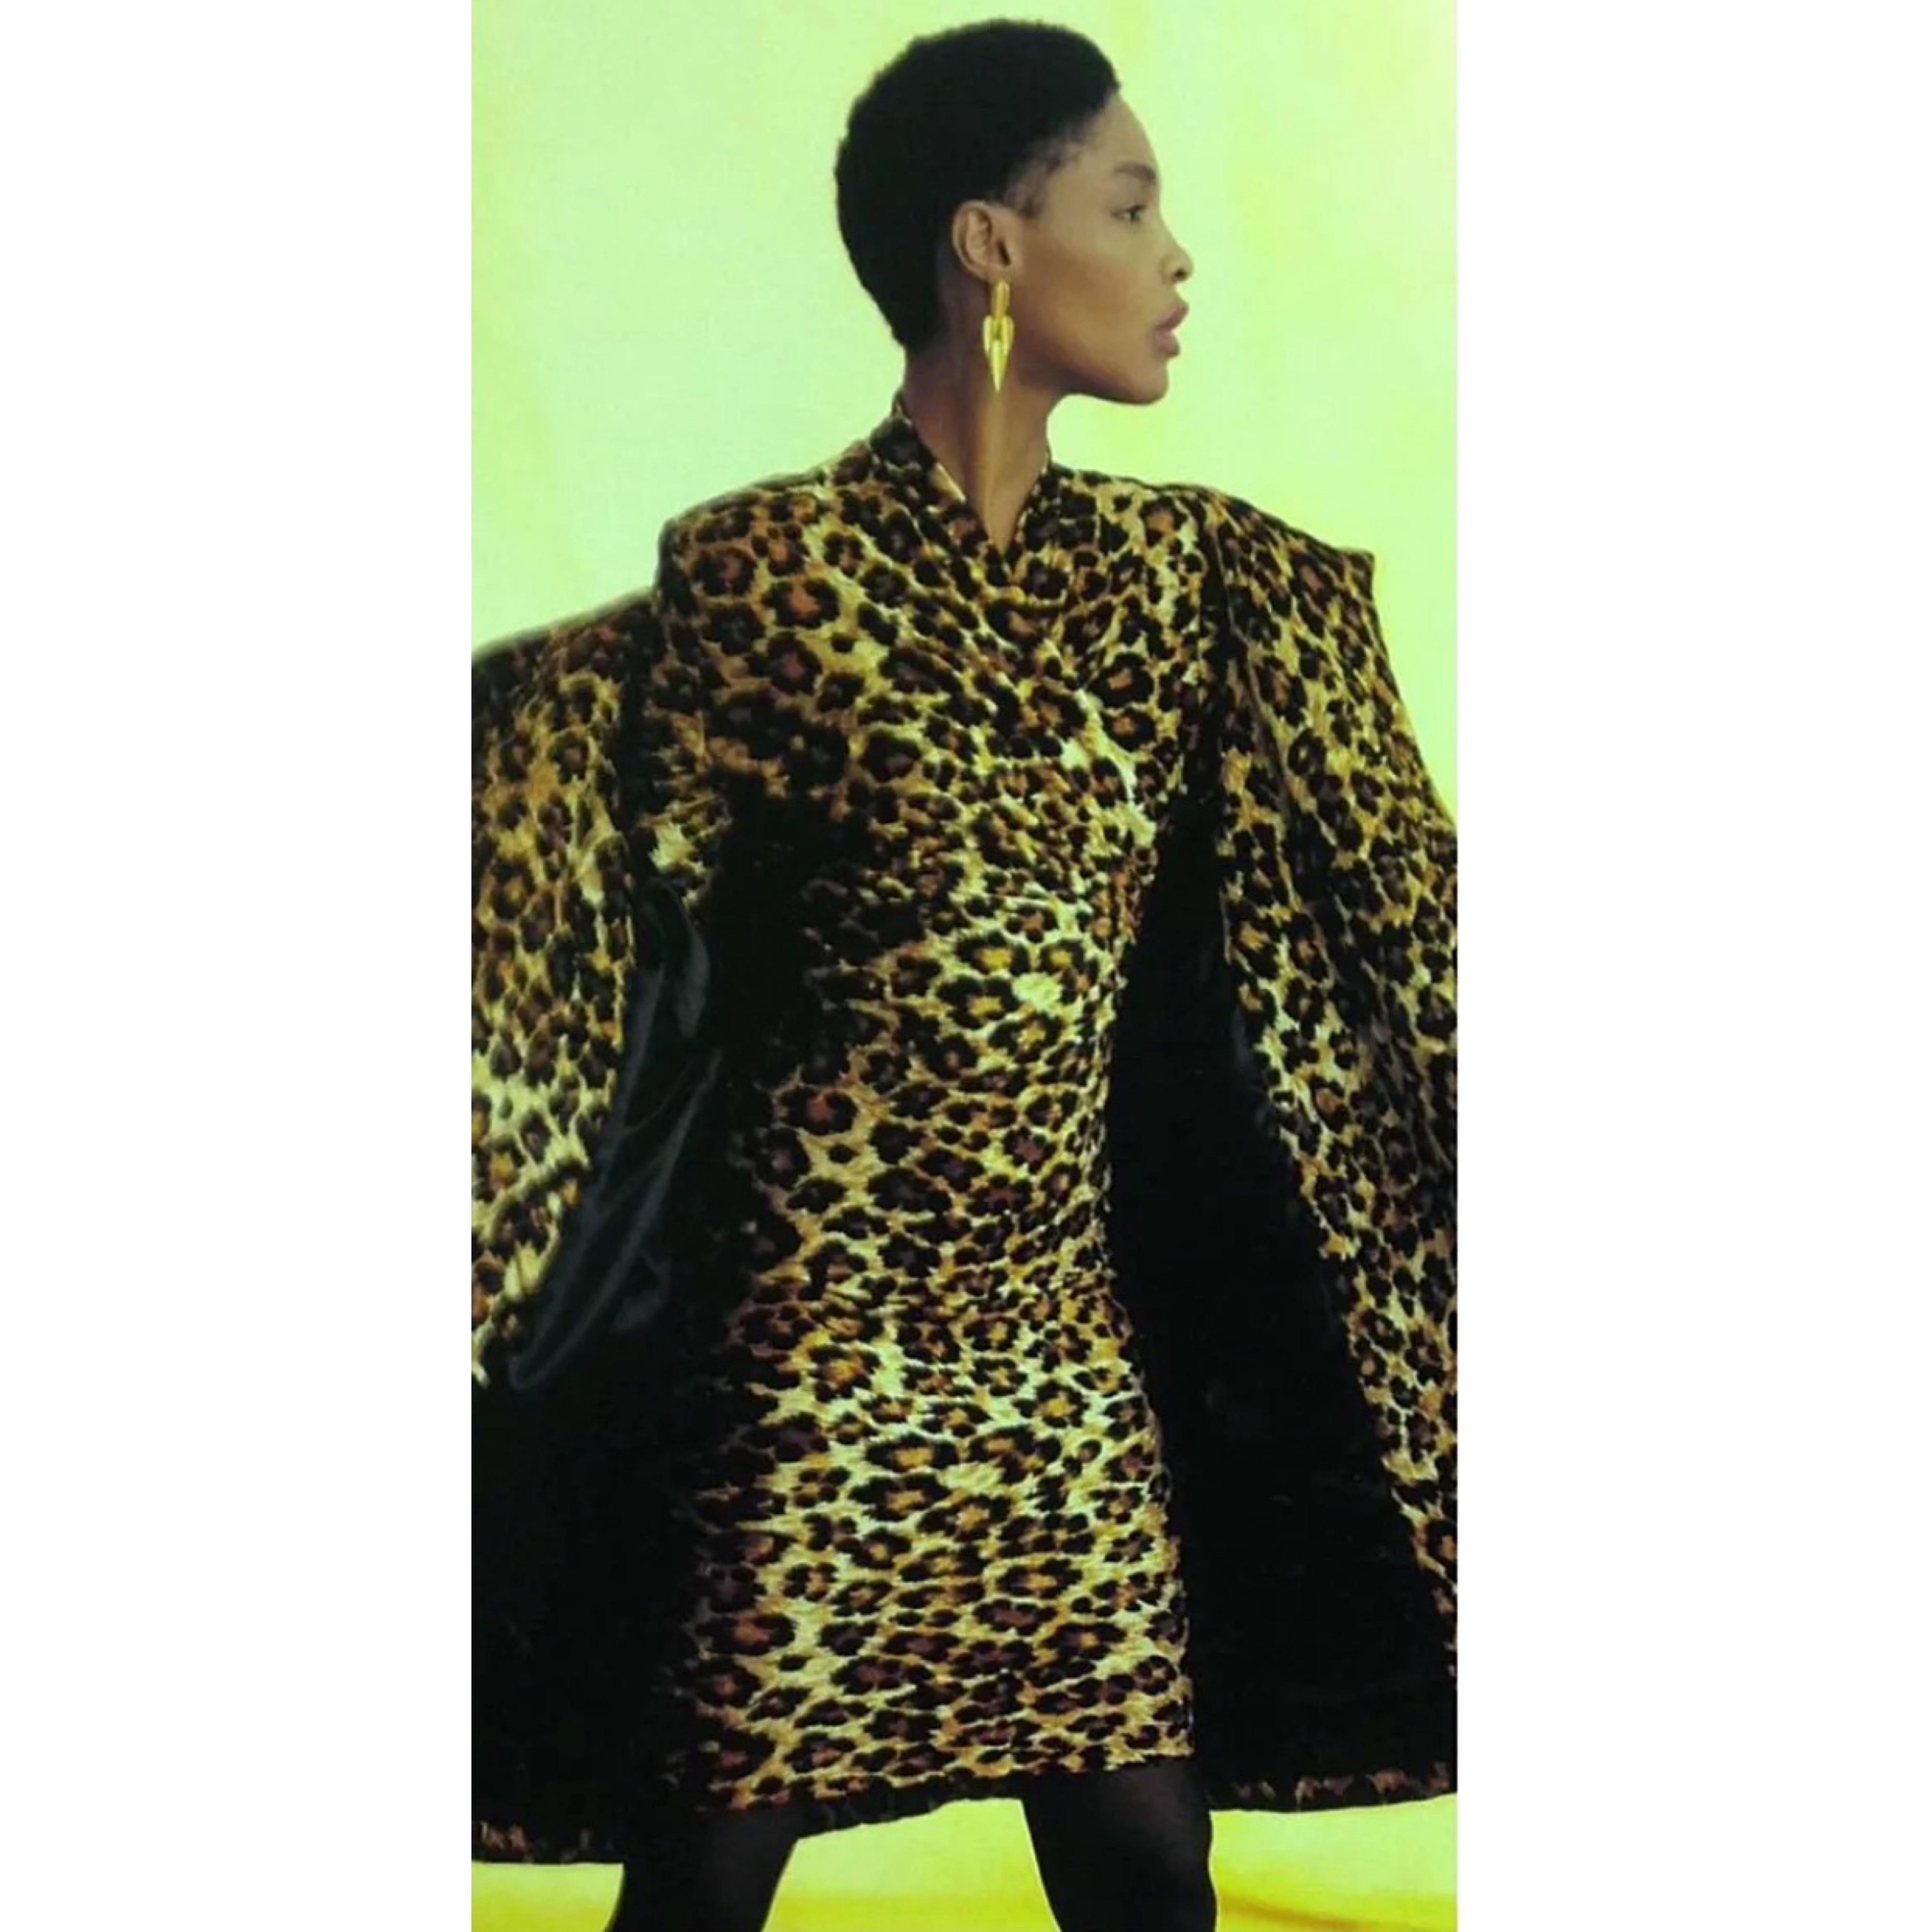 Rare documented PATRICK KELLY Fall 1989 leopard cheetah animal print velour bodycon dress ! Faux wrap style slips over the head with hidden zipper up the back and hook-and-eye closure. Soft velour fabric offers plenty of stretch. 
Perfect for any